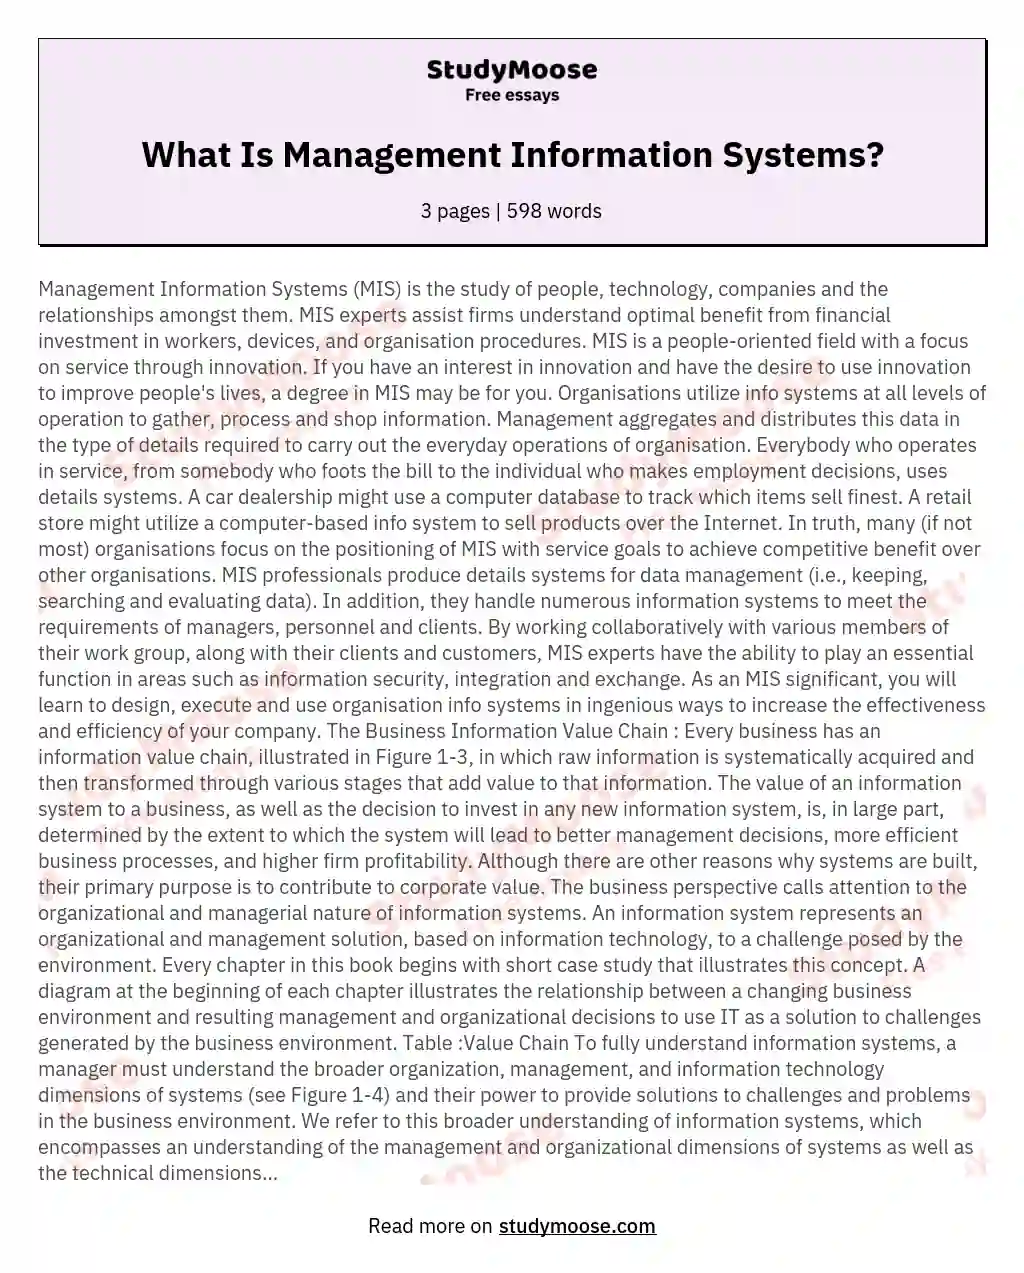 What Is Management Information Systems? essay